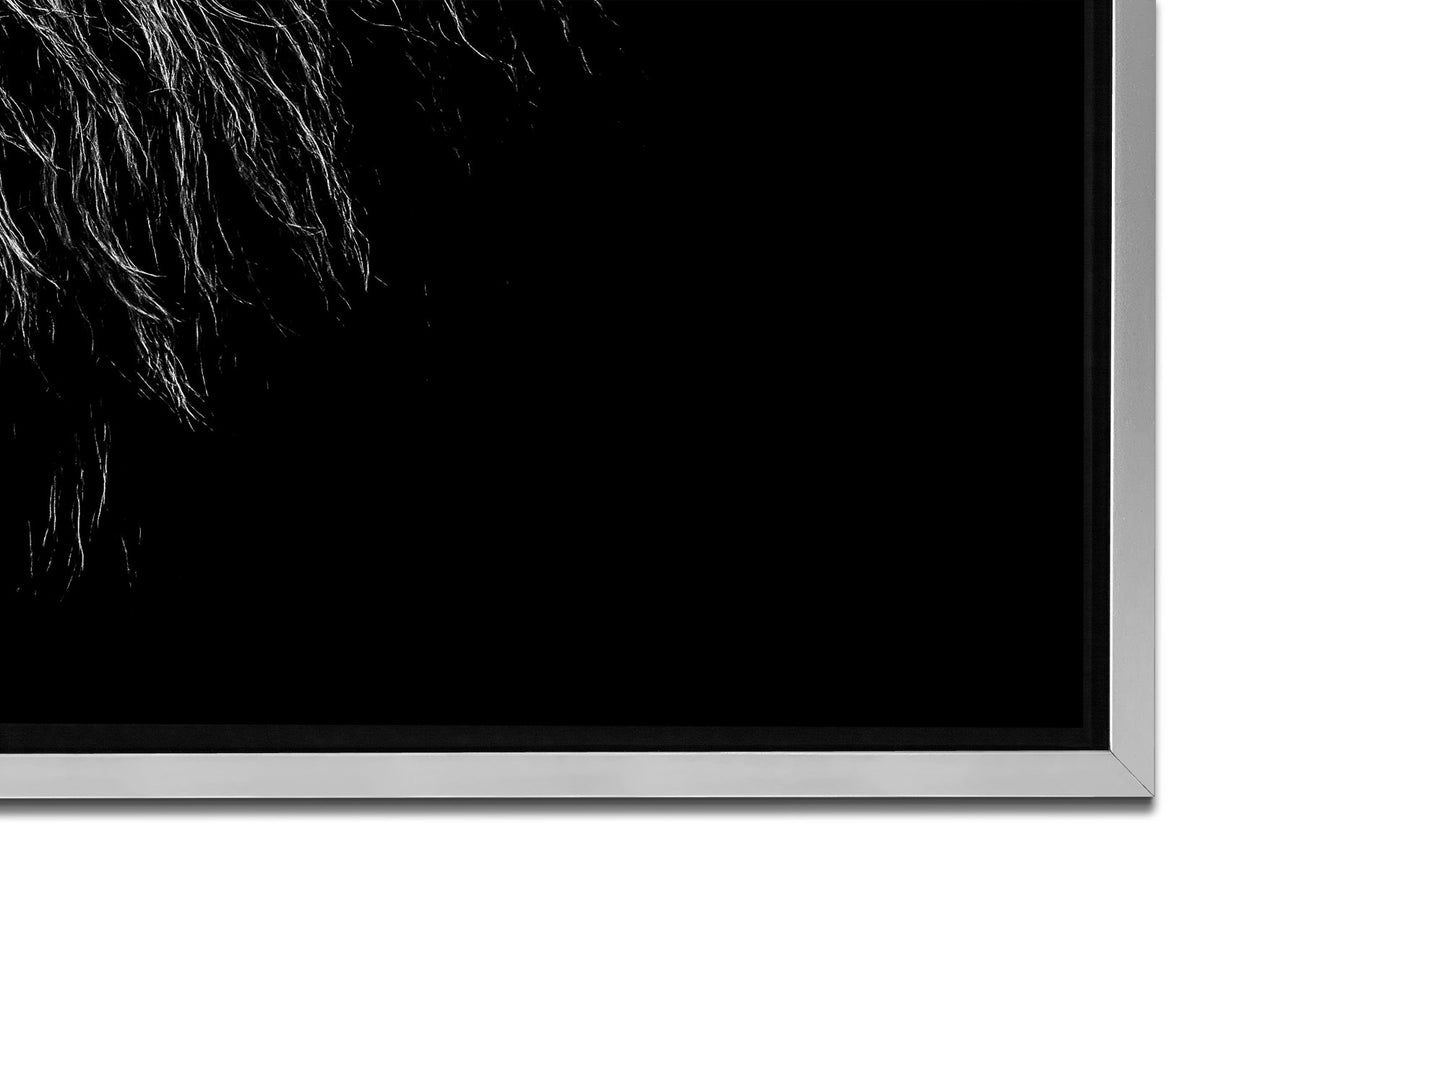 Wildlife Canvas Art-Lions Head Blue Eye in Black and White -Silver varnish